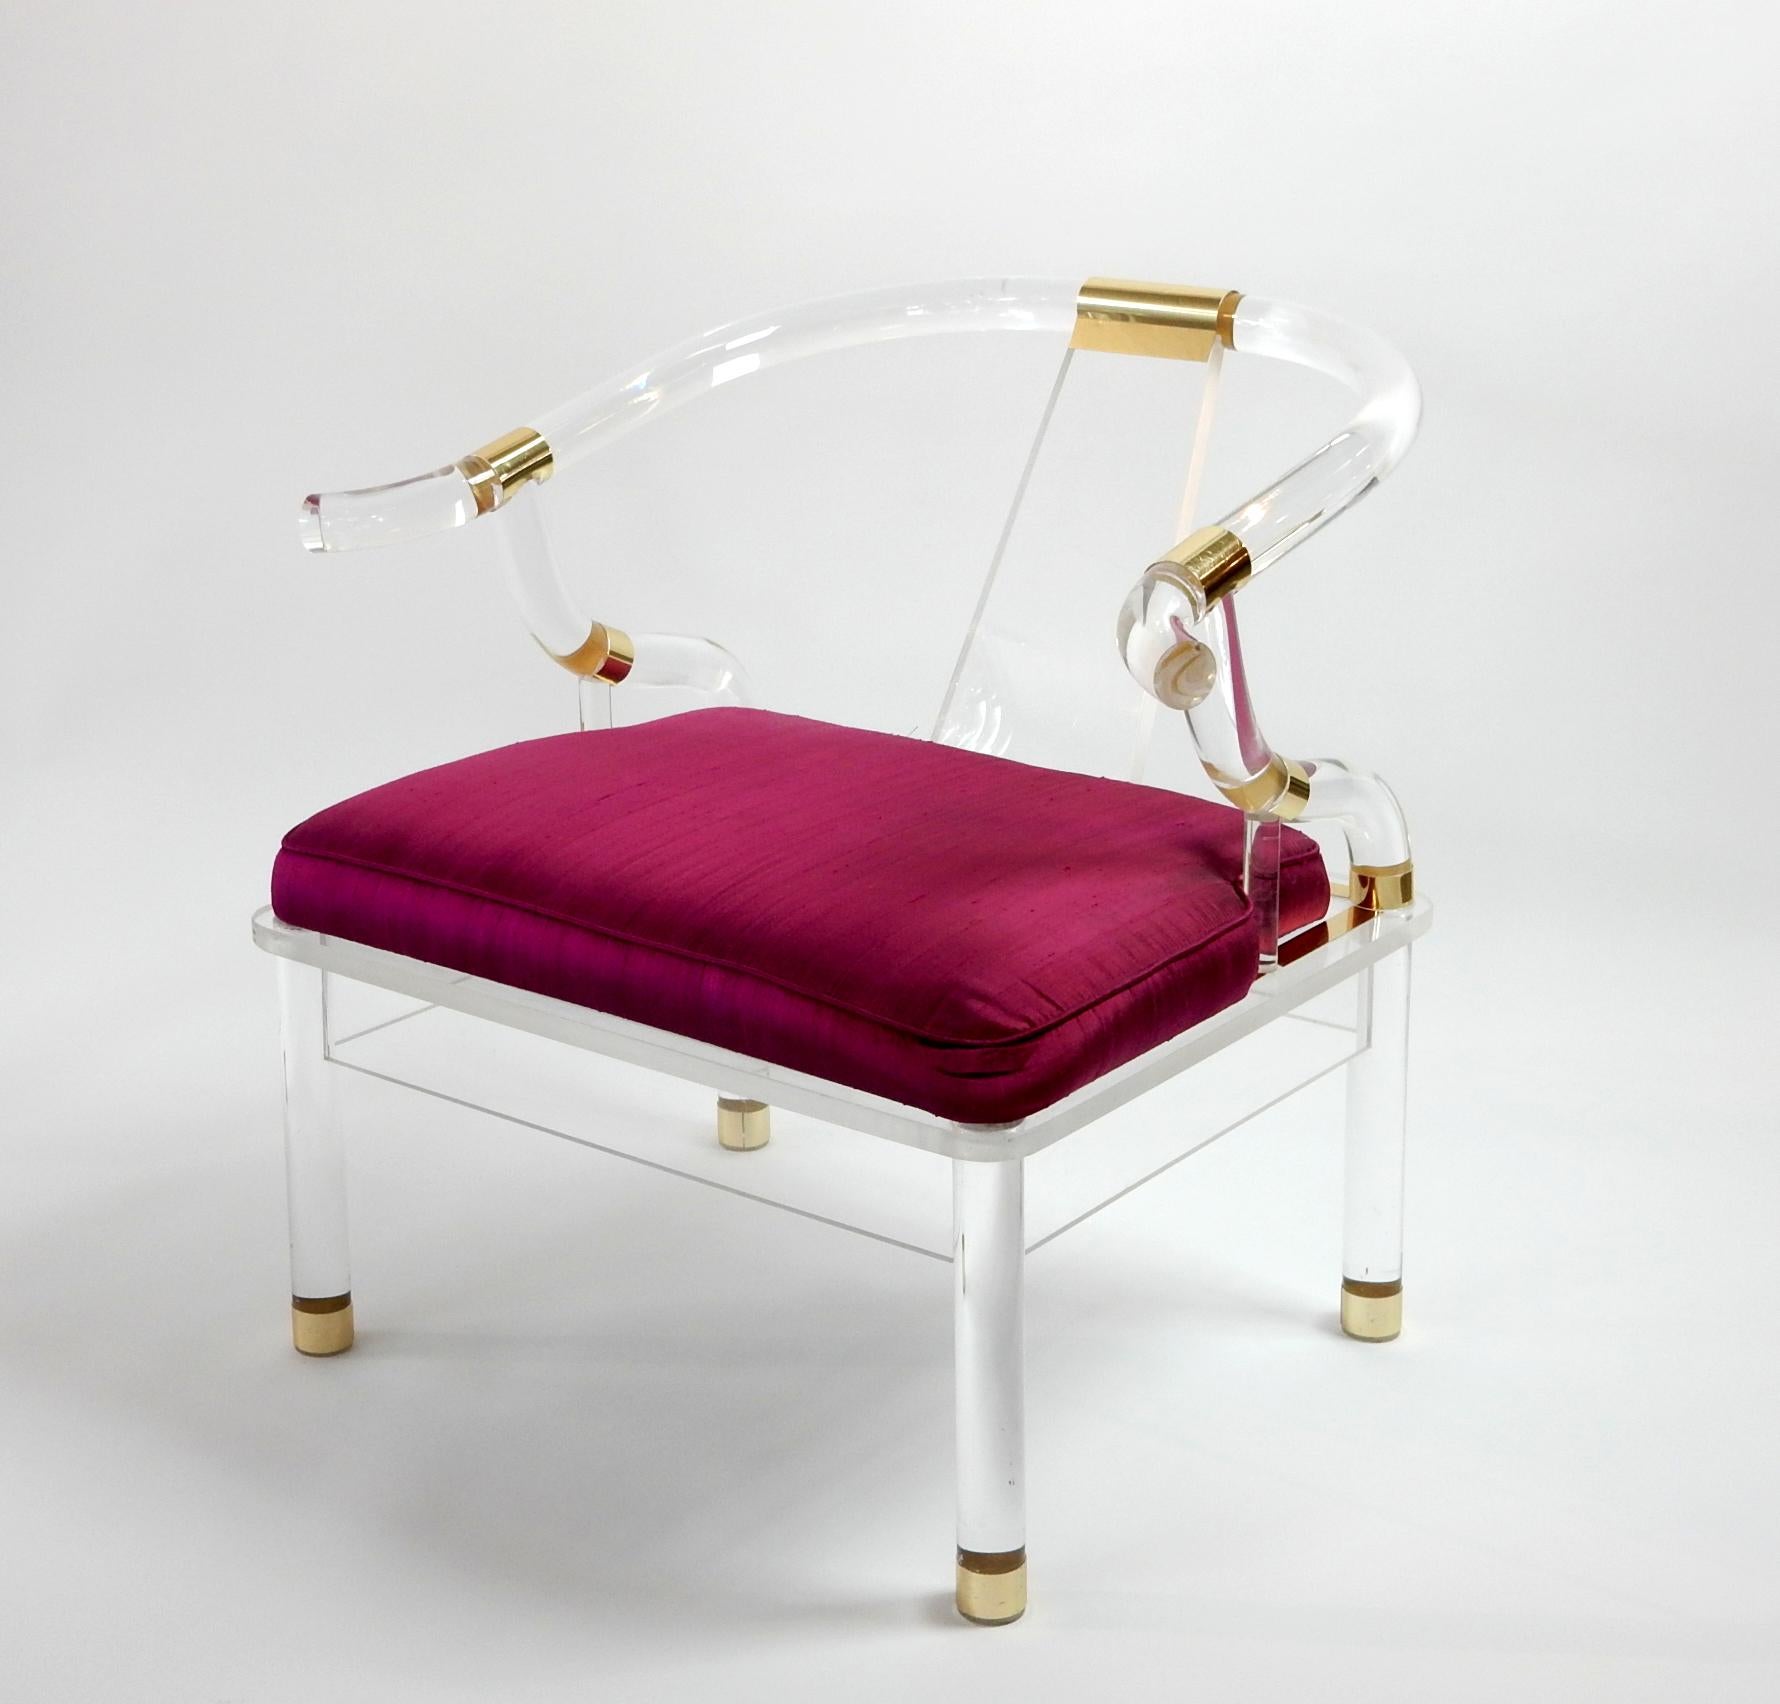 Fabulous Ming lounge chair formed of thick Lucite banded in brass.
A rare piece of sculptural art furniture which is perfect for an eclectic space. 
Overall exceptional condition with no damage or repairs.
Not signed or marked by designer. Heavy